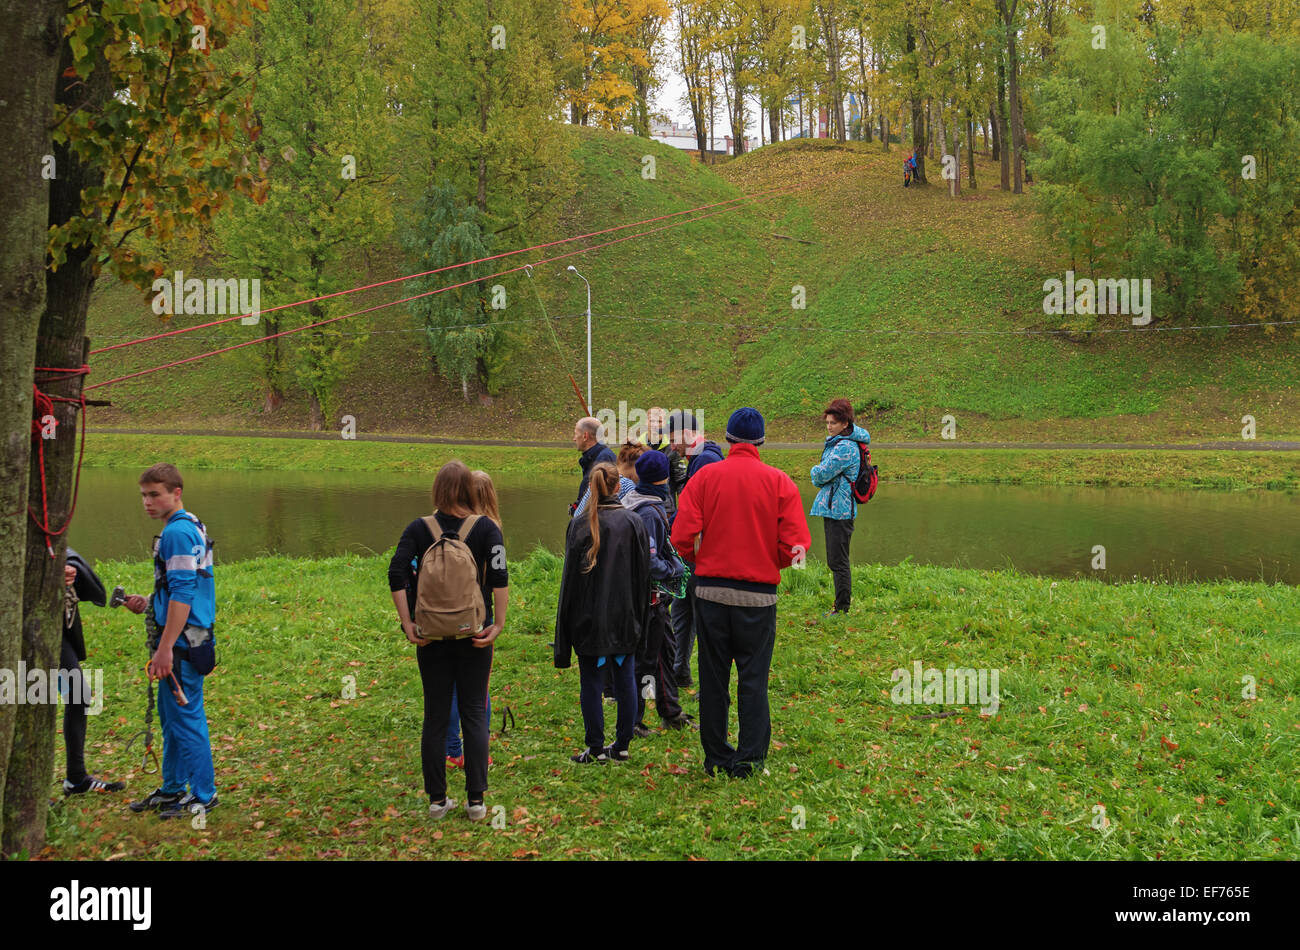 World Tourism Day - sport tourism competition in park on the river Vitba, Vitebsk, inclined crossing on ropes through the river. Stock Photo